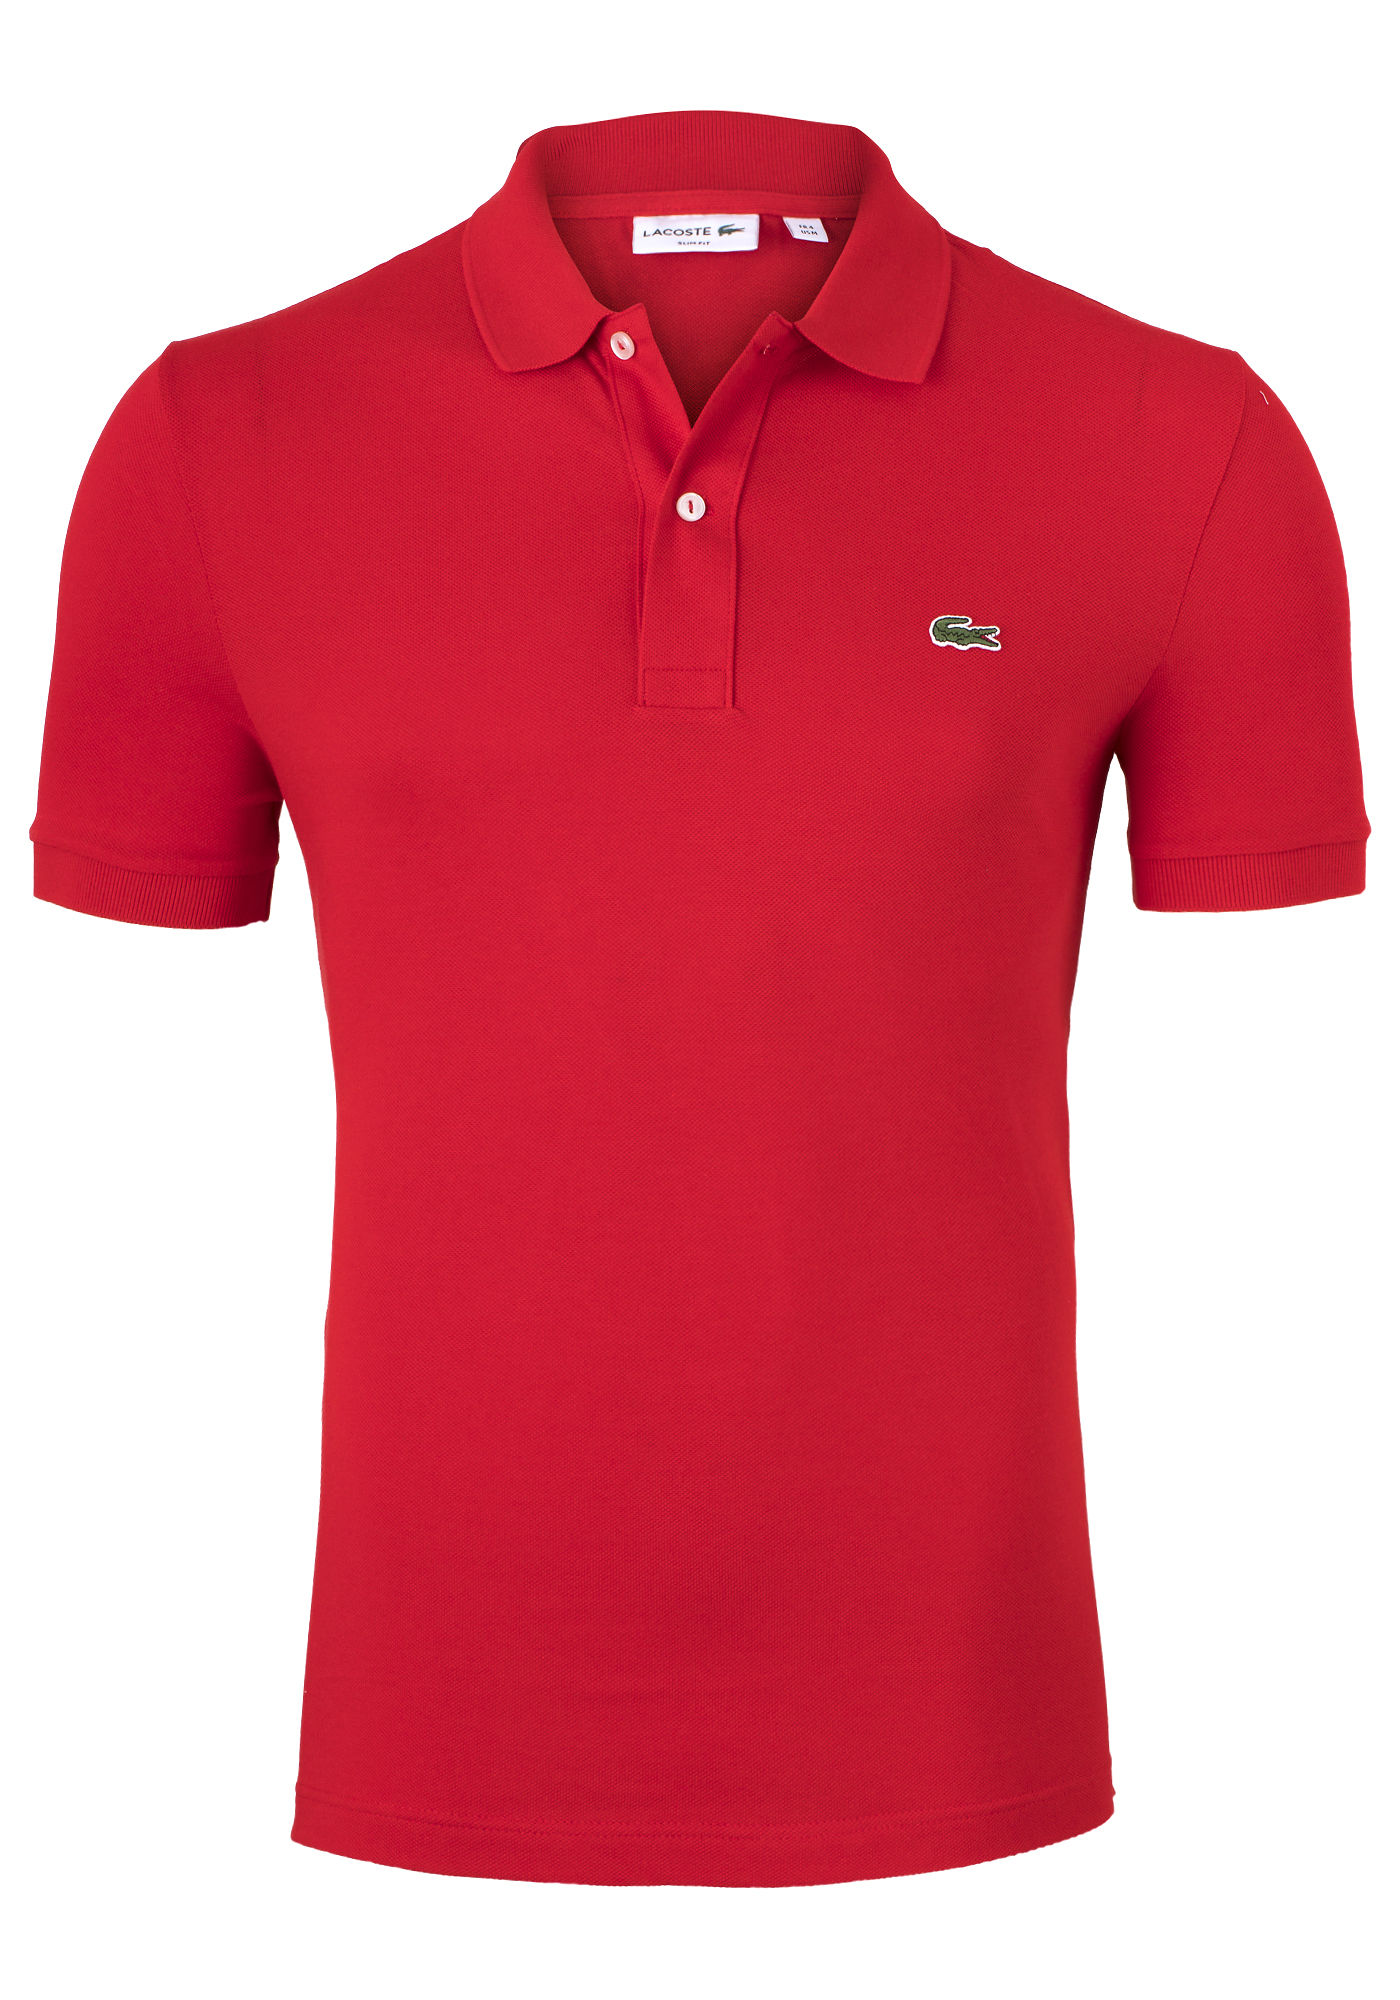 Competitief Specialist gebied Lacoste Slimc Fit polo, rood - Gratis bezorgd